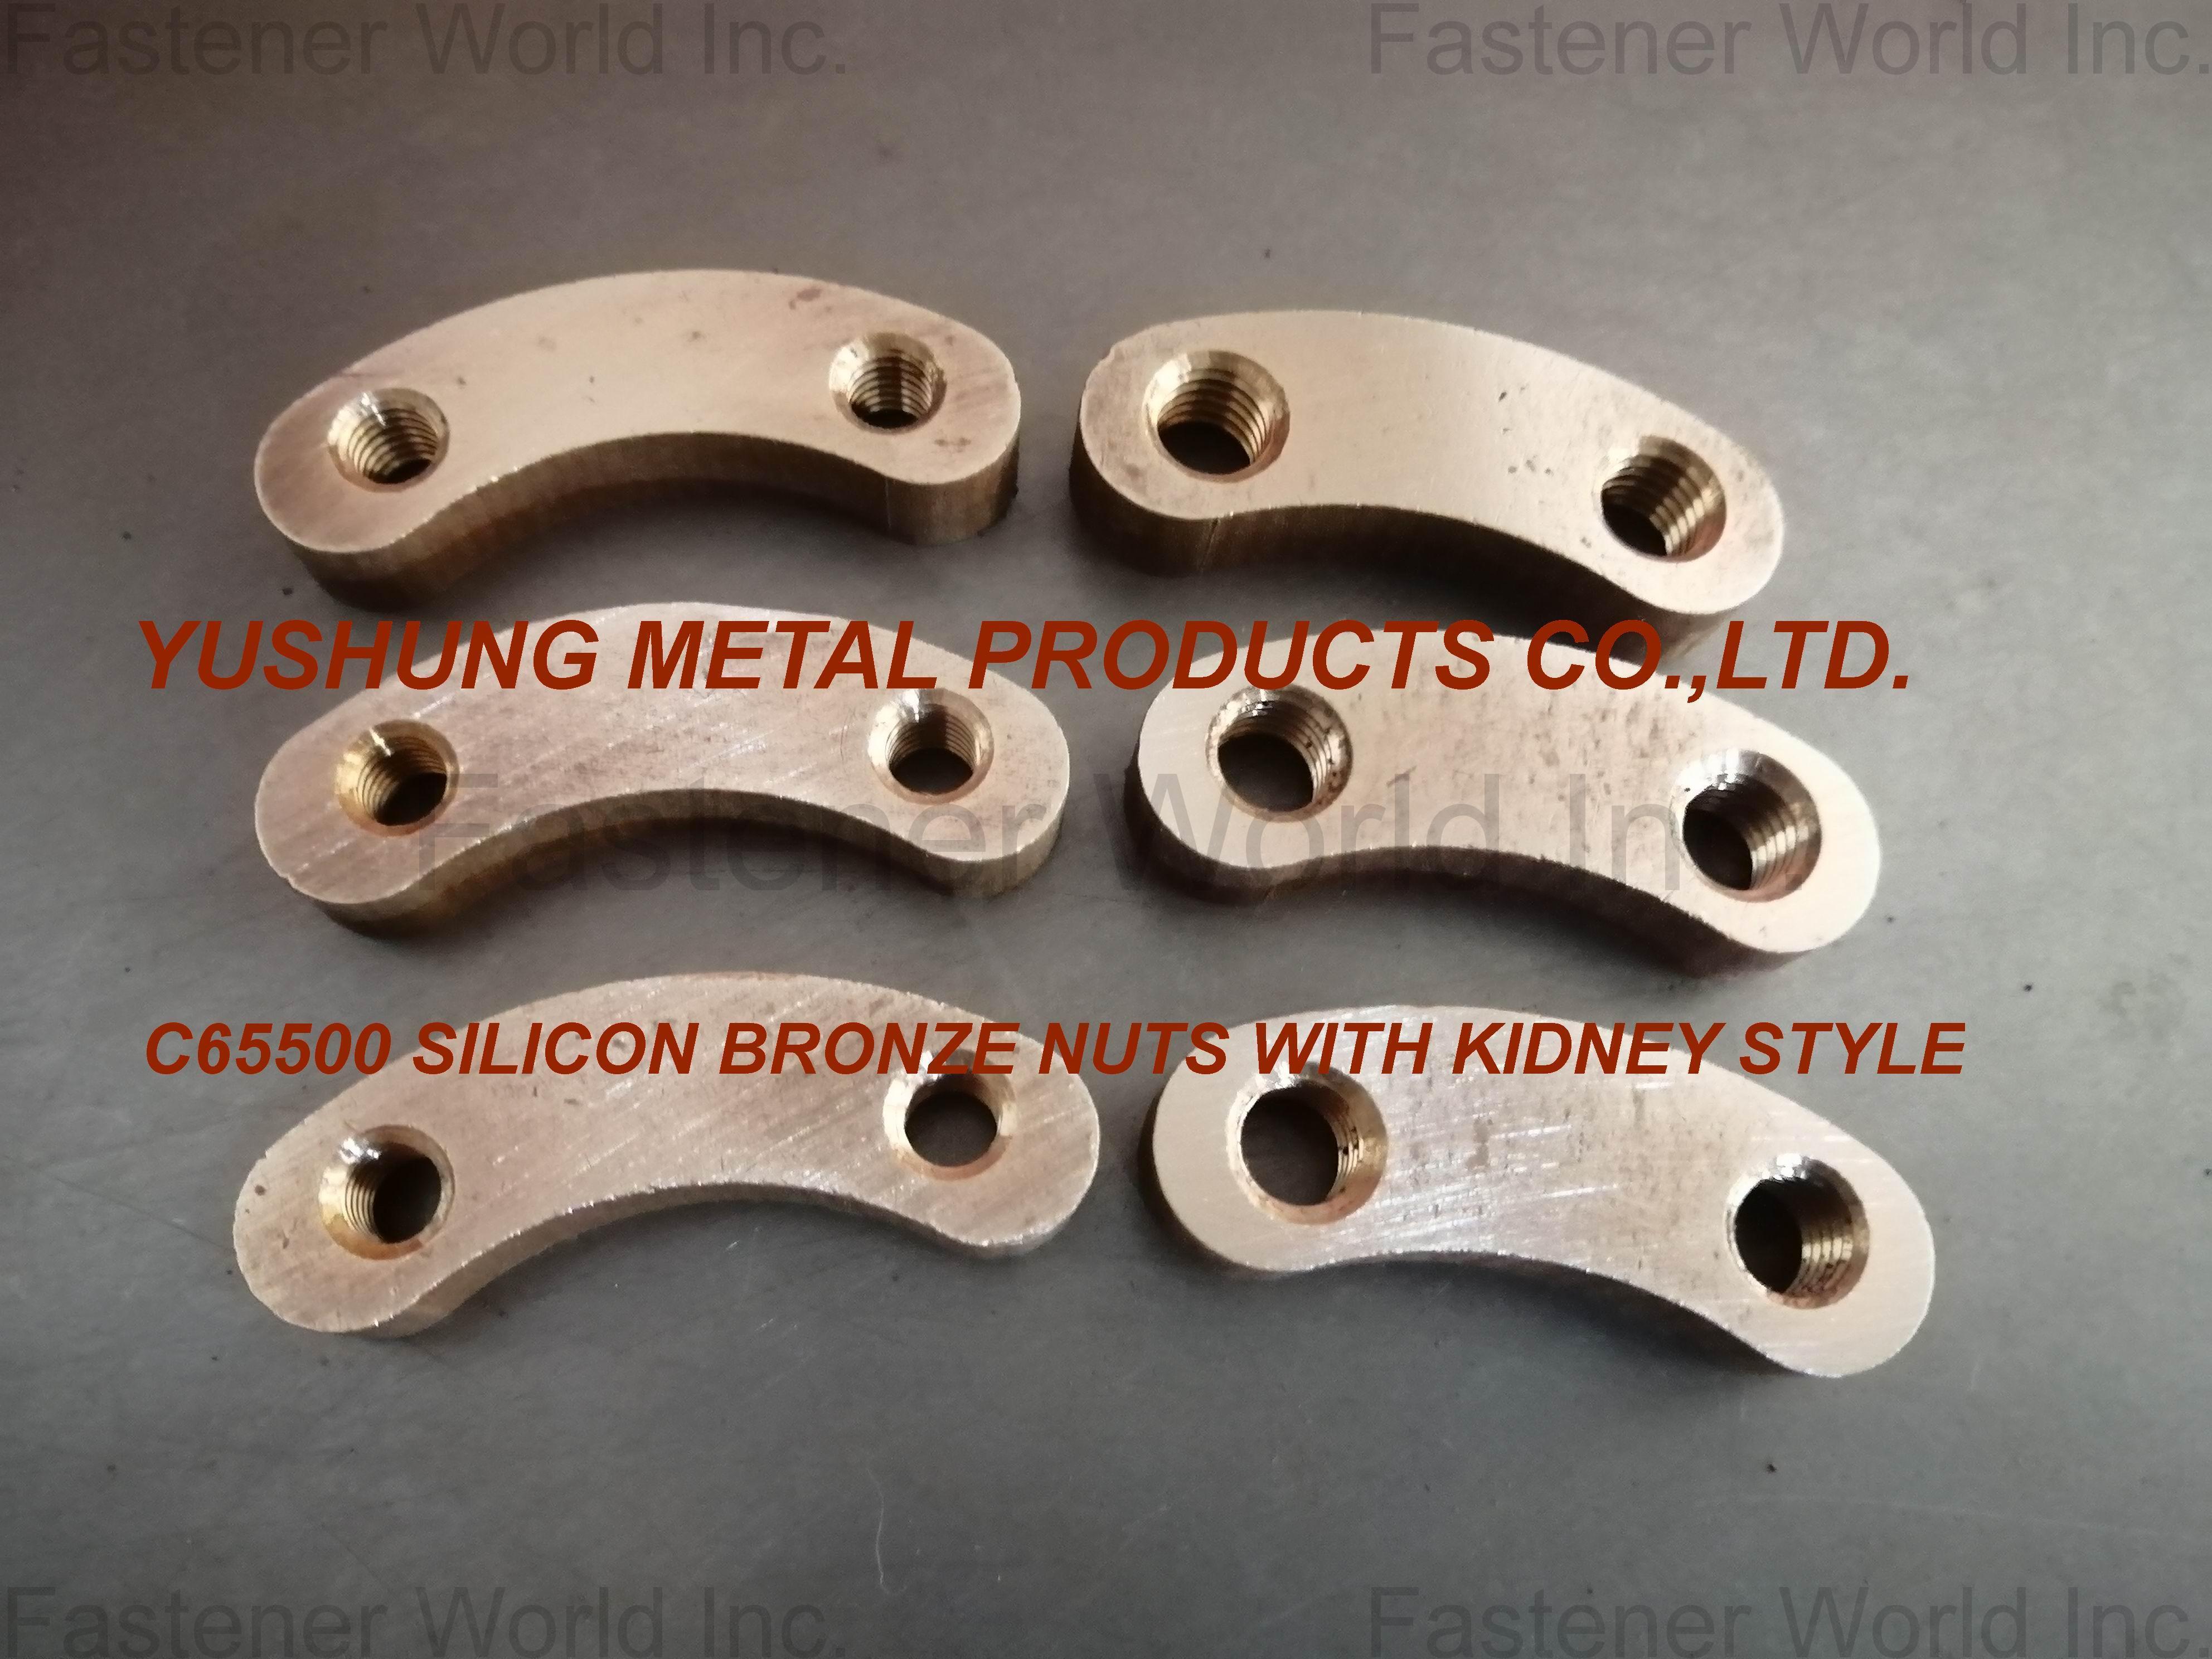 Chongqing Yushung Non-Ferrous Metals Co., Ltd. , C65500 Silicon bronze special nuts with kidney style